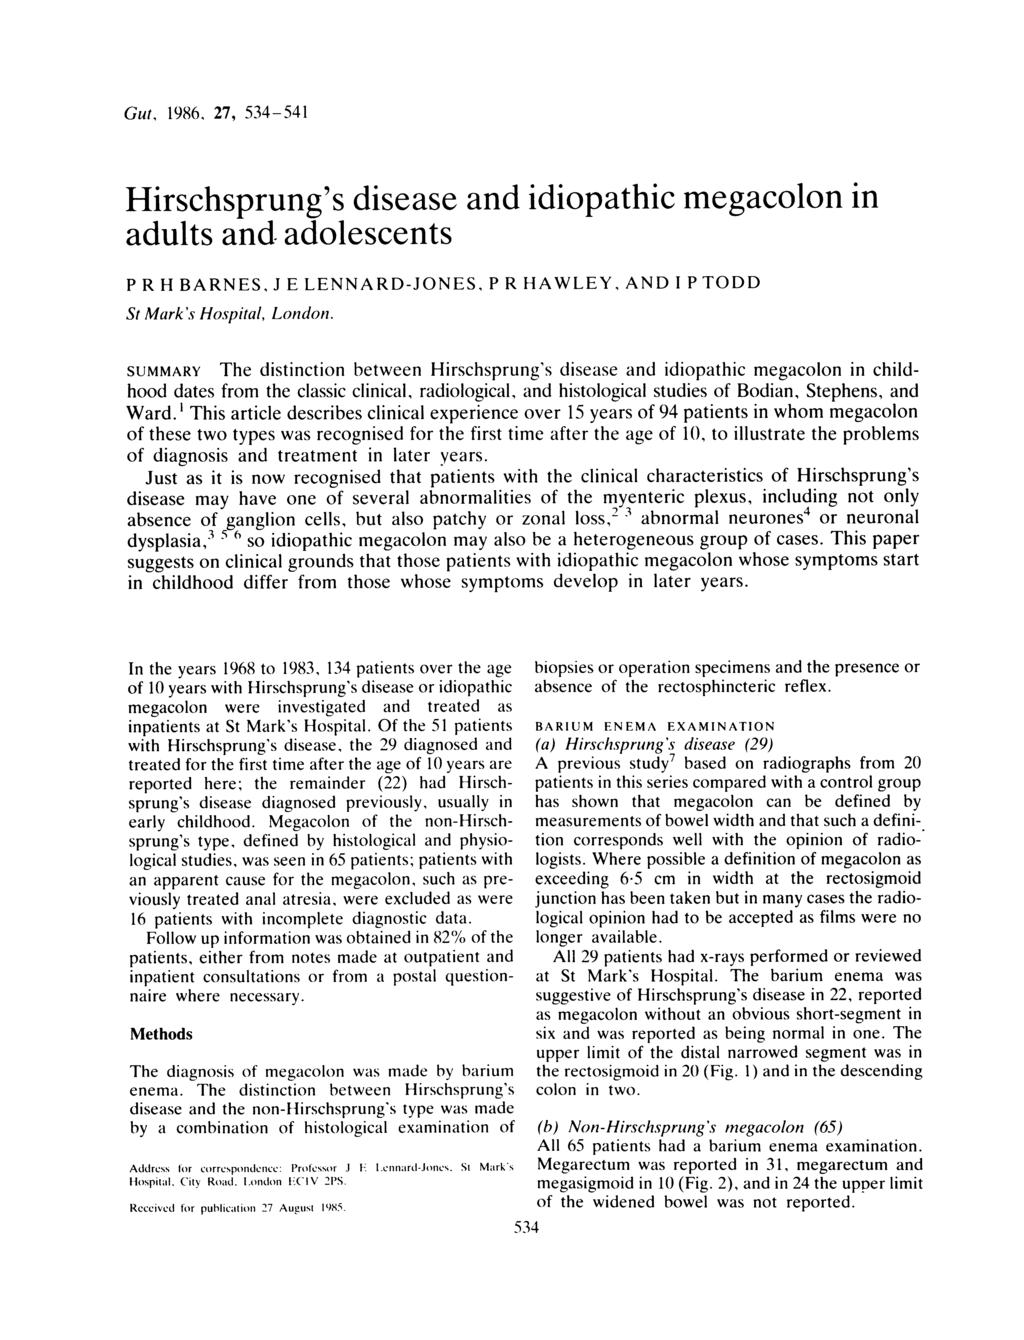 Gut, 1986, 27, 534-541 Hirschsprung's disease and idiopathic megacolon in adults and adolescents P R H BARNES, J E LENNARD-JONES, P R HAWLEY, AND I P TODD St Mark's Hospital, London.